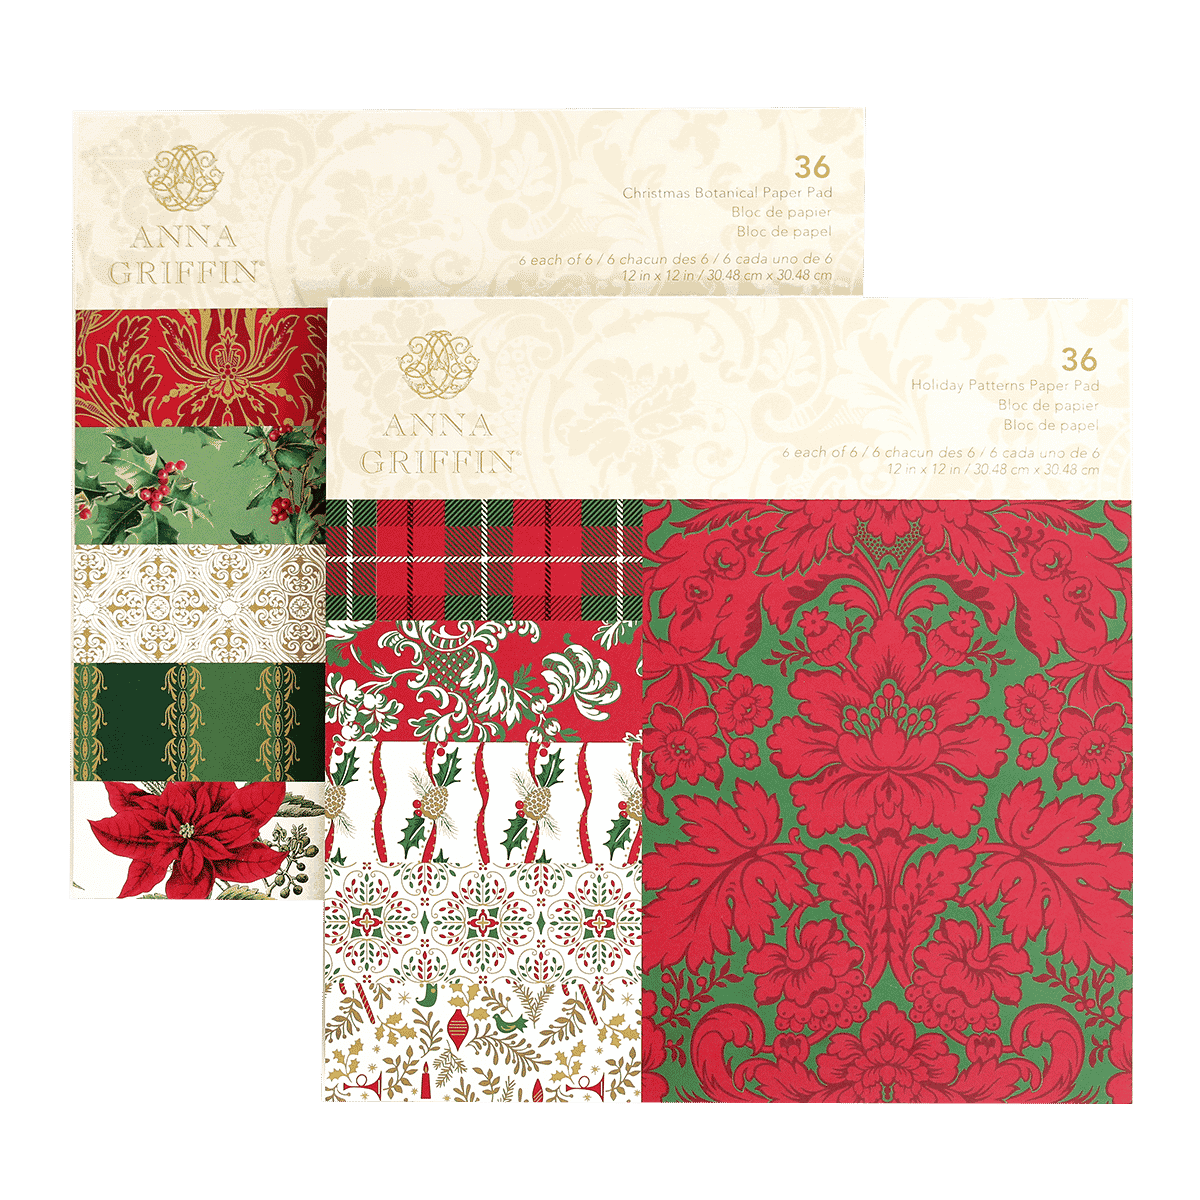  Christmas - Smooth Cardstock Paper Pad - A2 - 4.25 x 5.5 -  40 Sheets